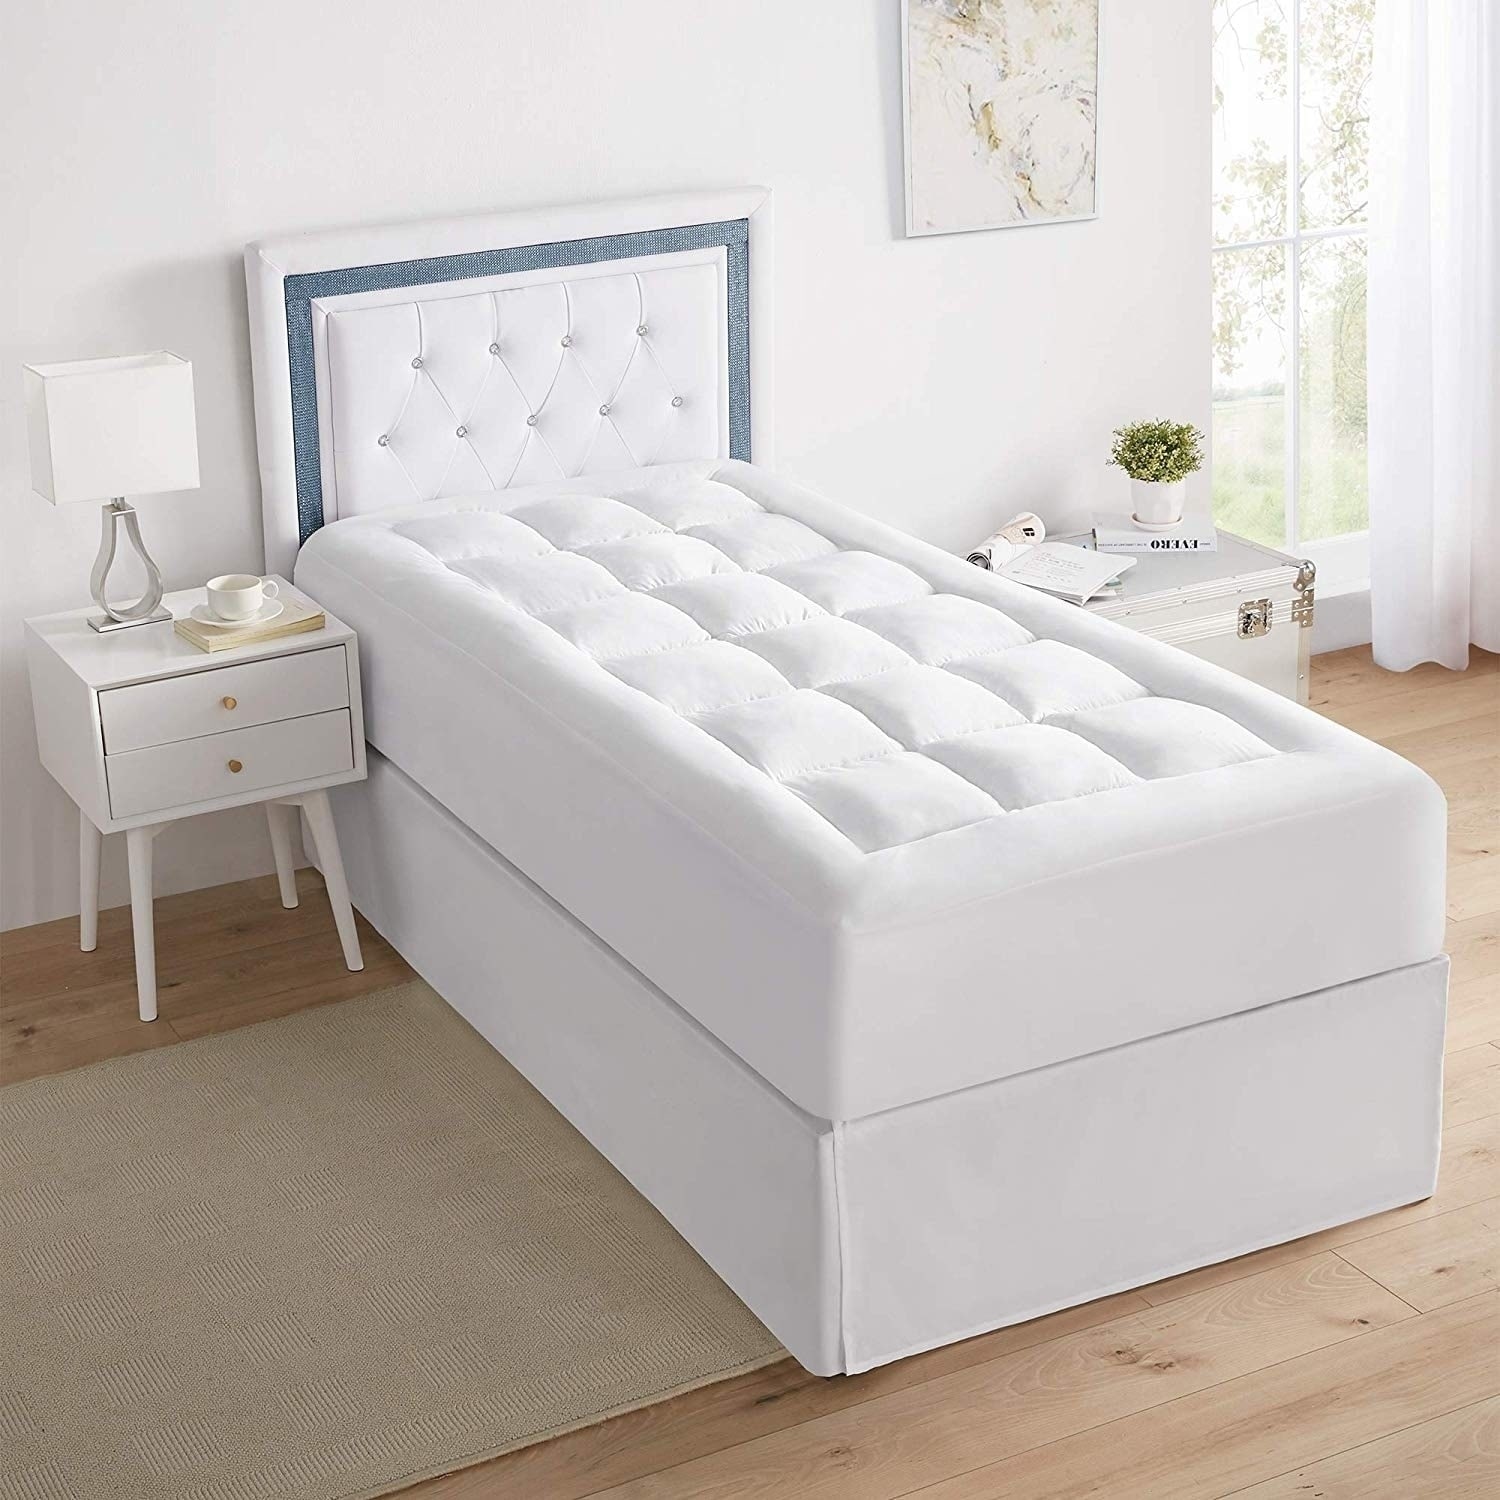 Mattress Pad Cover Queen Size Pillow Top Topper Thick Luxury Bed Bedding White 